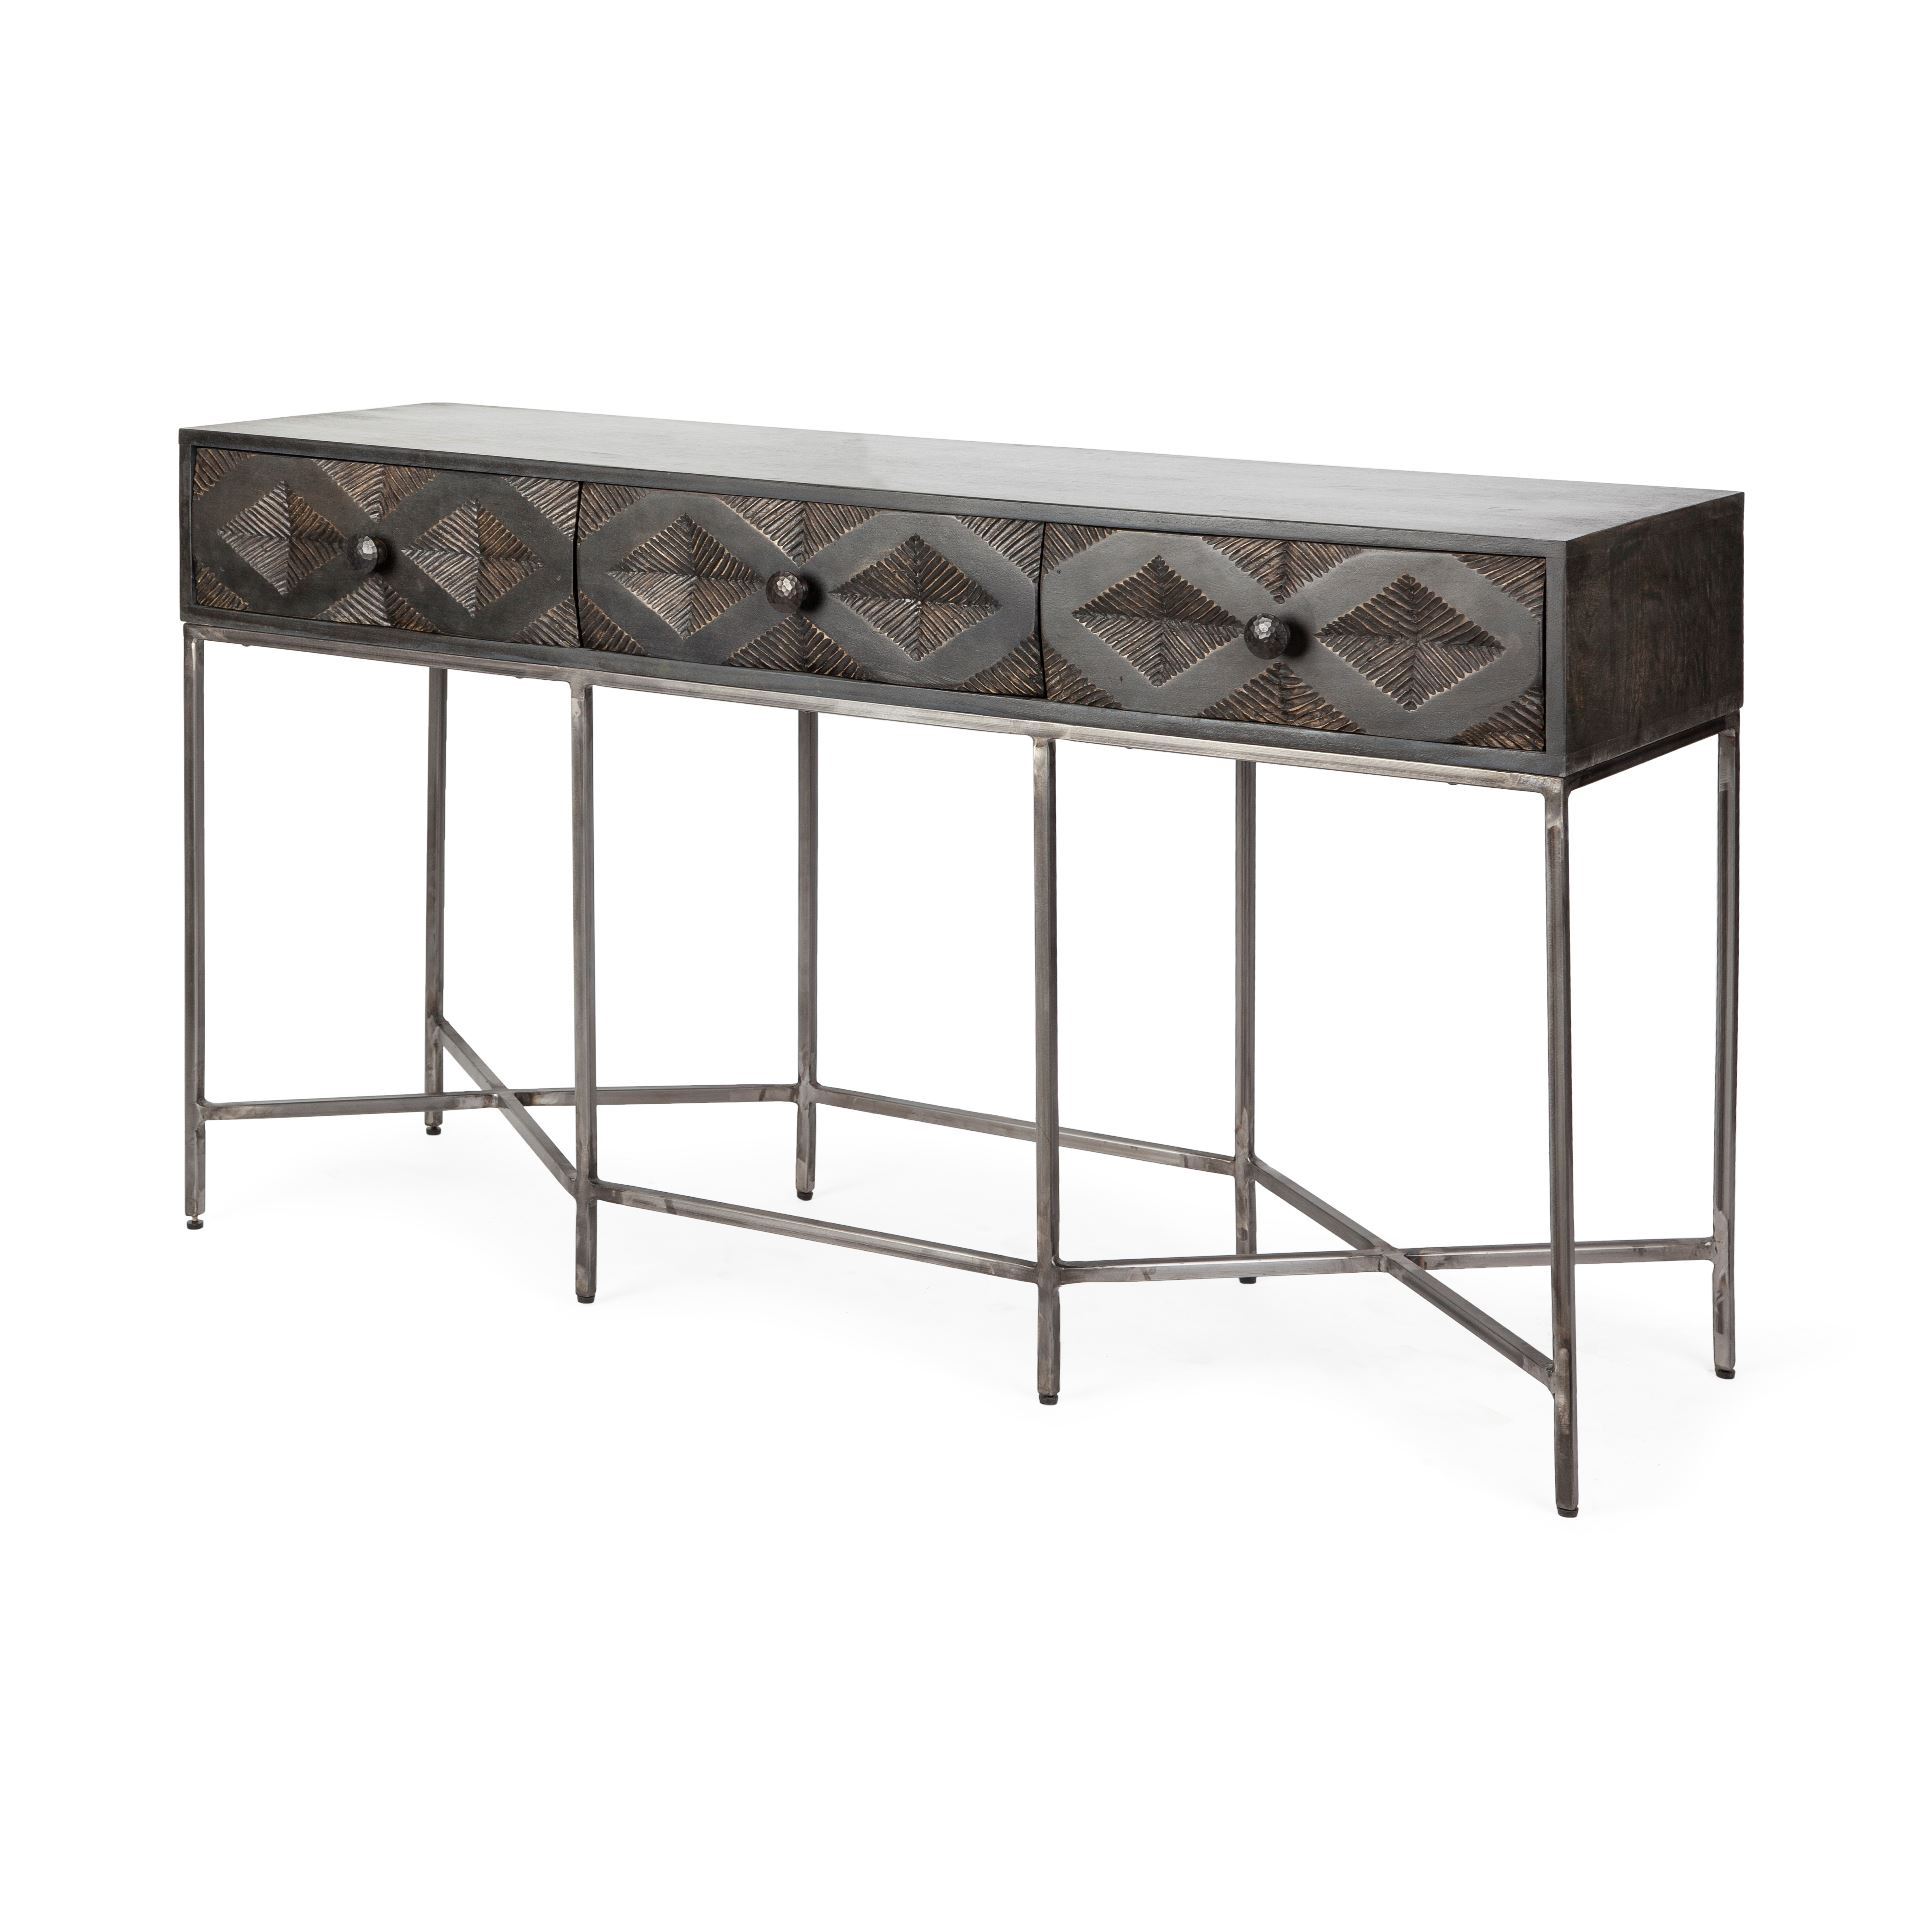 Dark Brown Mango Wood Finish Console Table With 3 Drawers